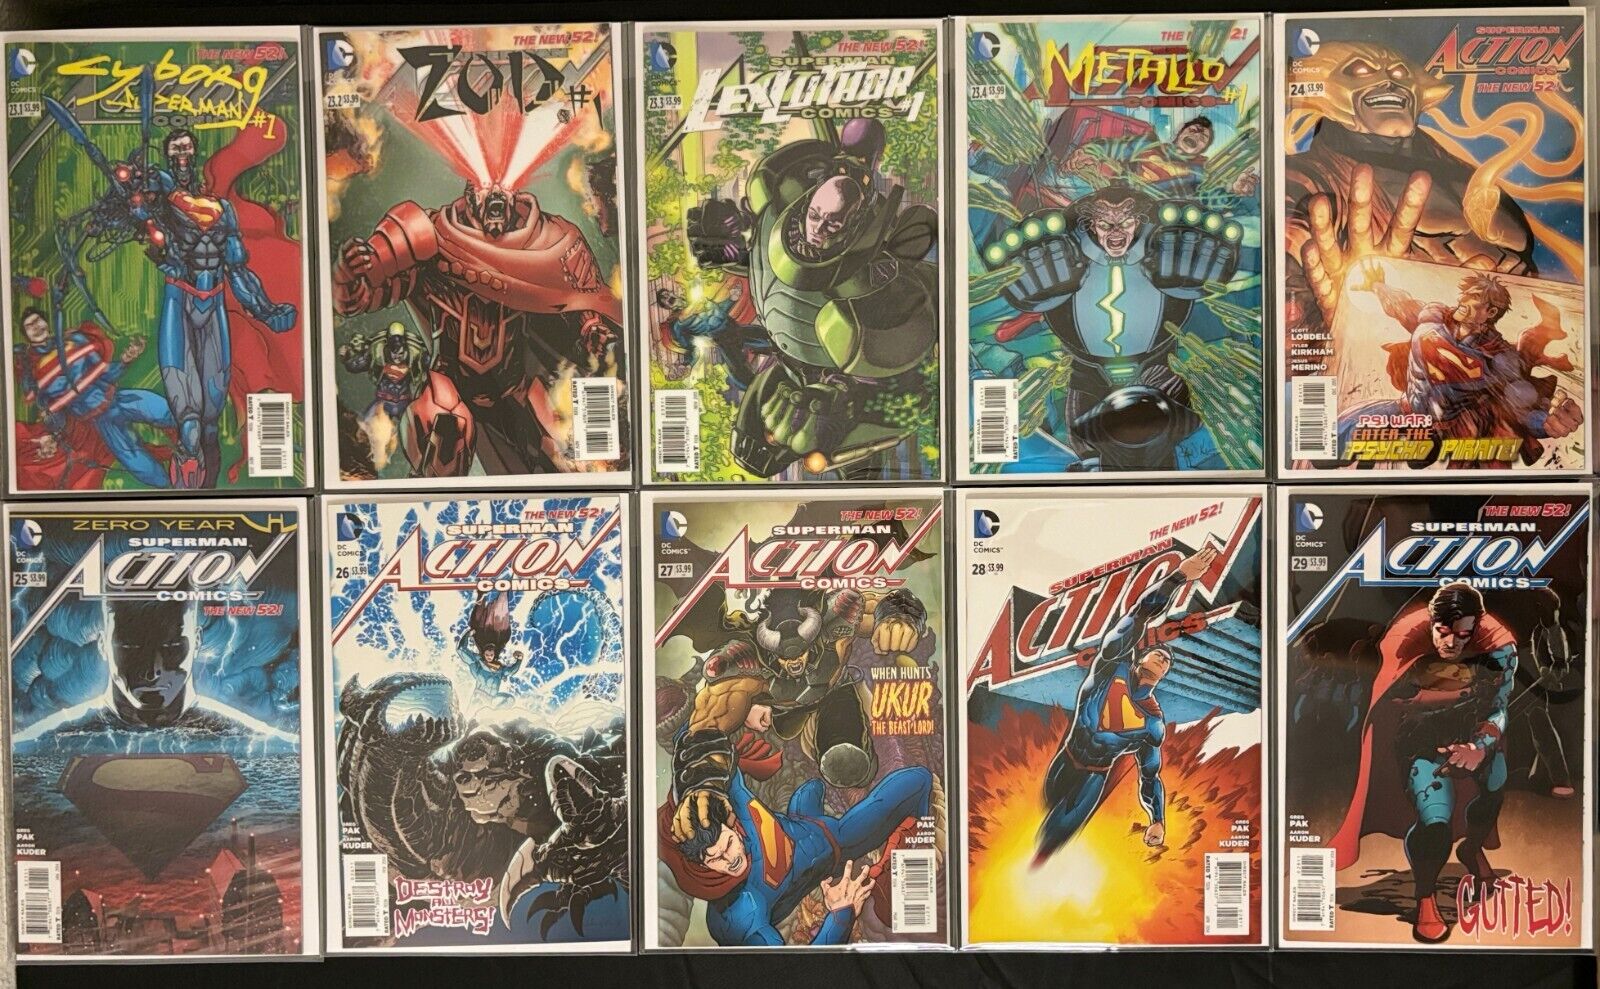 ACTION COMICS Vol. 2 Lot (DC/2011), Issues #23.1 - 23.4, 23-29, NM Condition